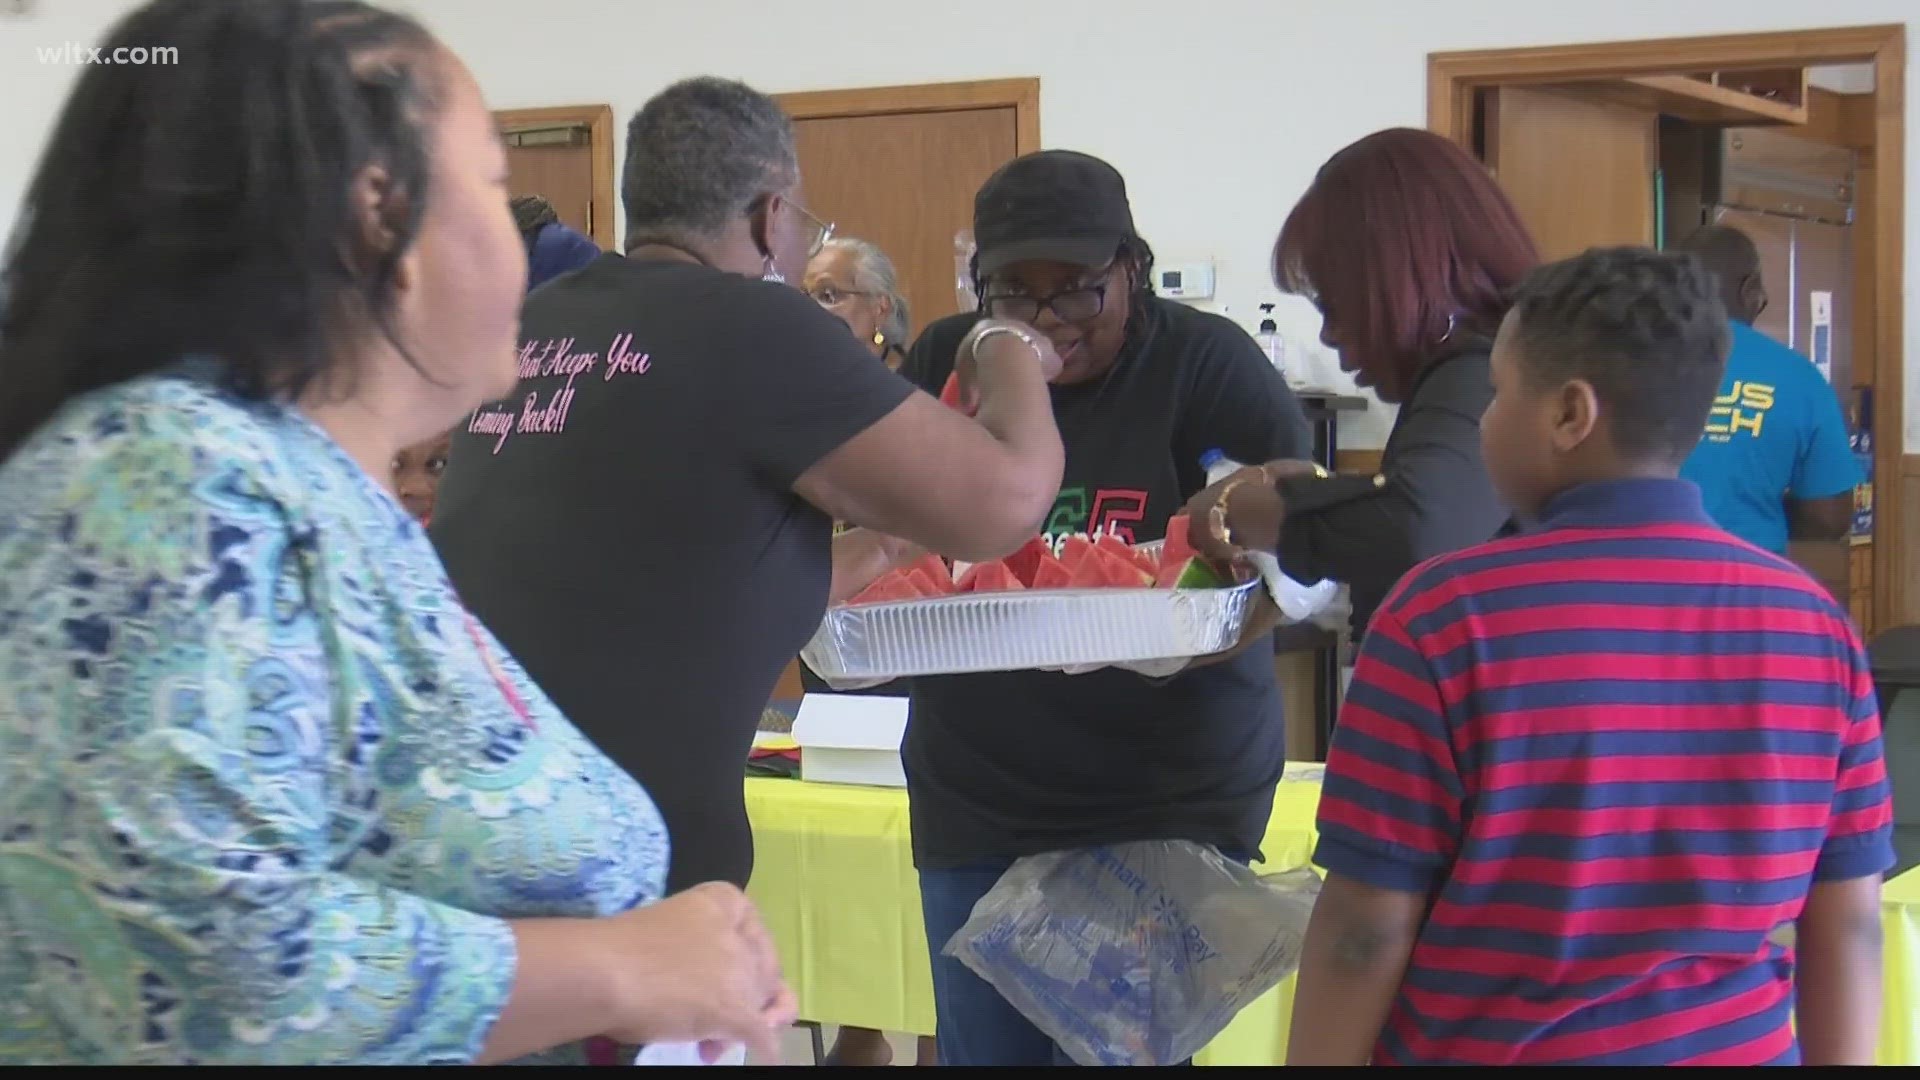 The event included a baking contest, food trucks, Black history displays, a bounce house and games for kids and adults.